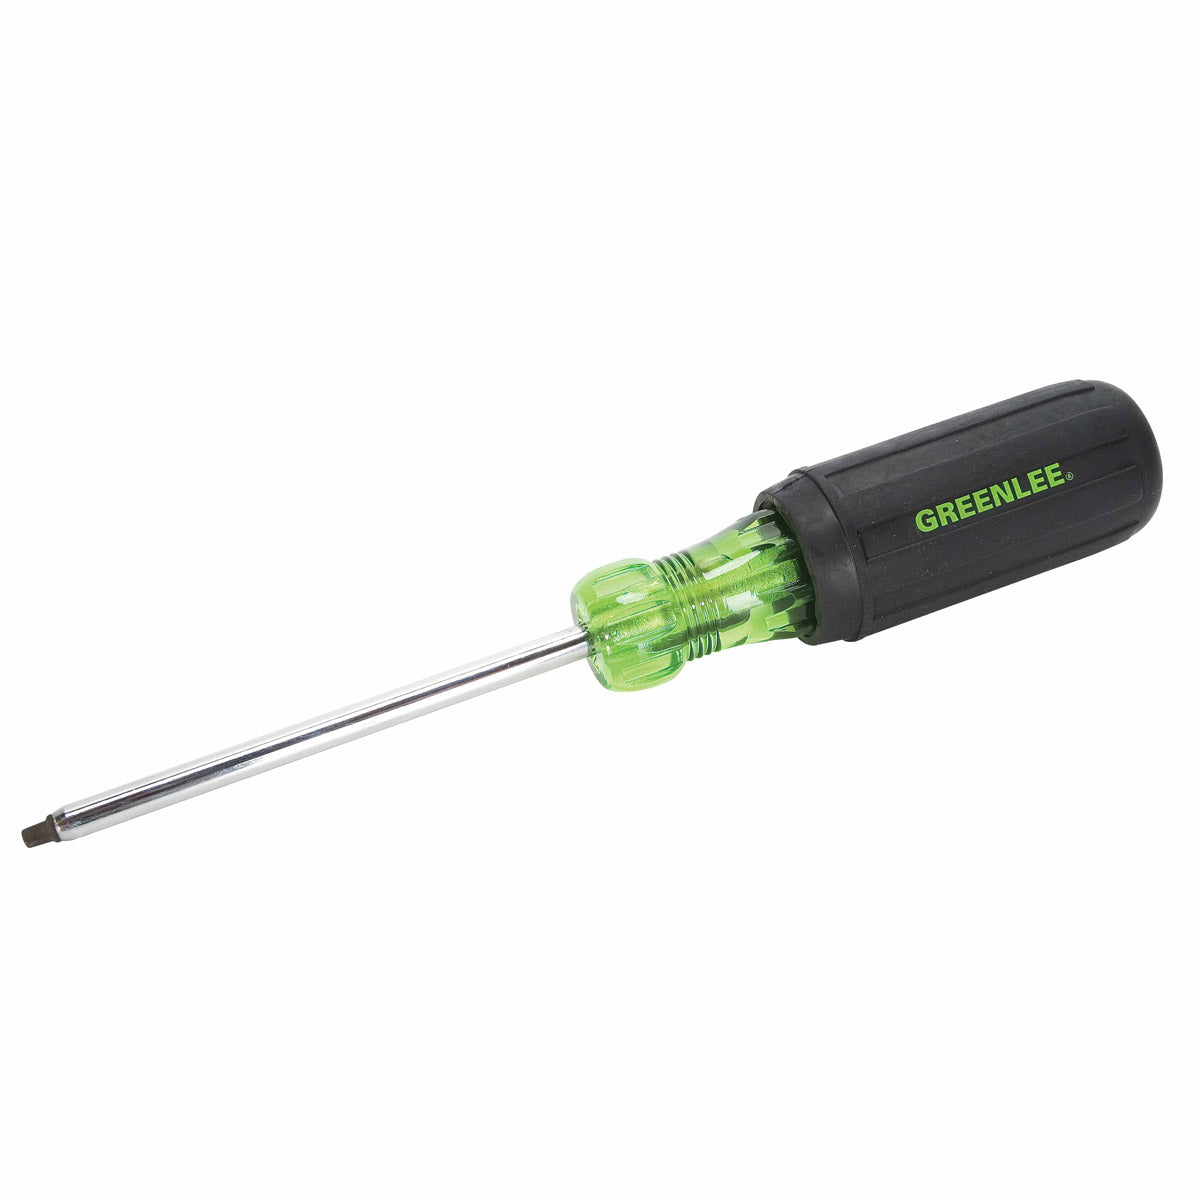 Greenlee 0353-12C Square-Recess Tip Driver #1 x 4"